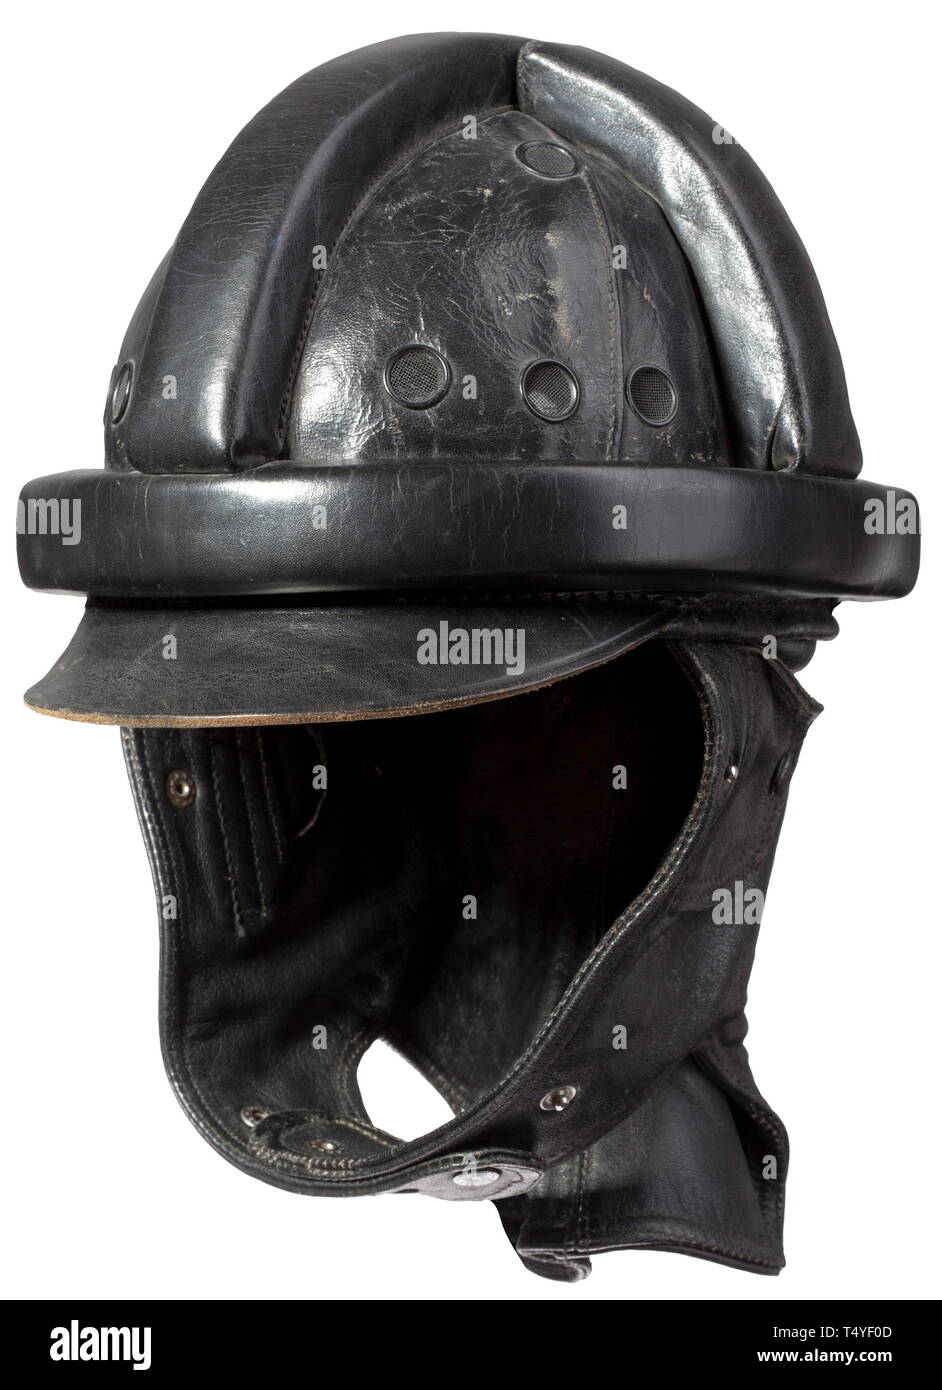 A crash helmet for sail- and glider pilots Black lacquered leather body with protective bulges, one of the 16 ventilation perforations damaged, ear- and neck guards of black leather. In the black imitation silk liner is a bordered white stamp 'LS' with Luftwaffe eagle. Leather sweatband with '55' size stamping. historic, historical, organisation, organization, organizations, organisations, 20th century, Editorial-Use-Only Stock Photo